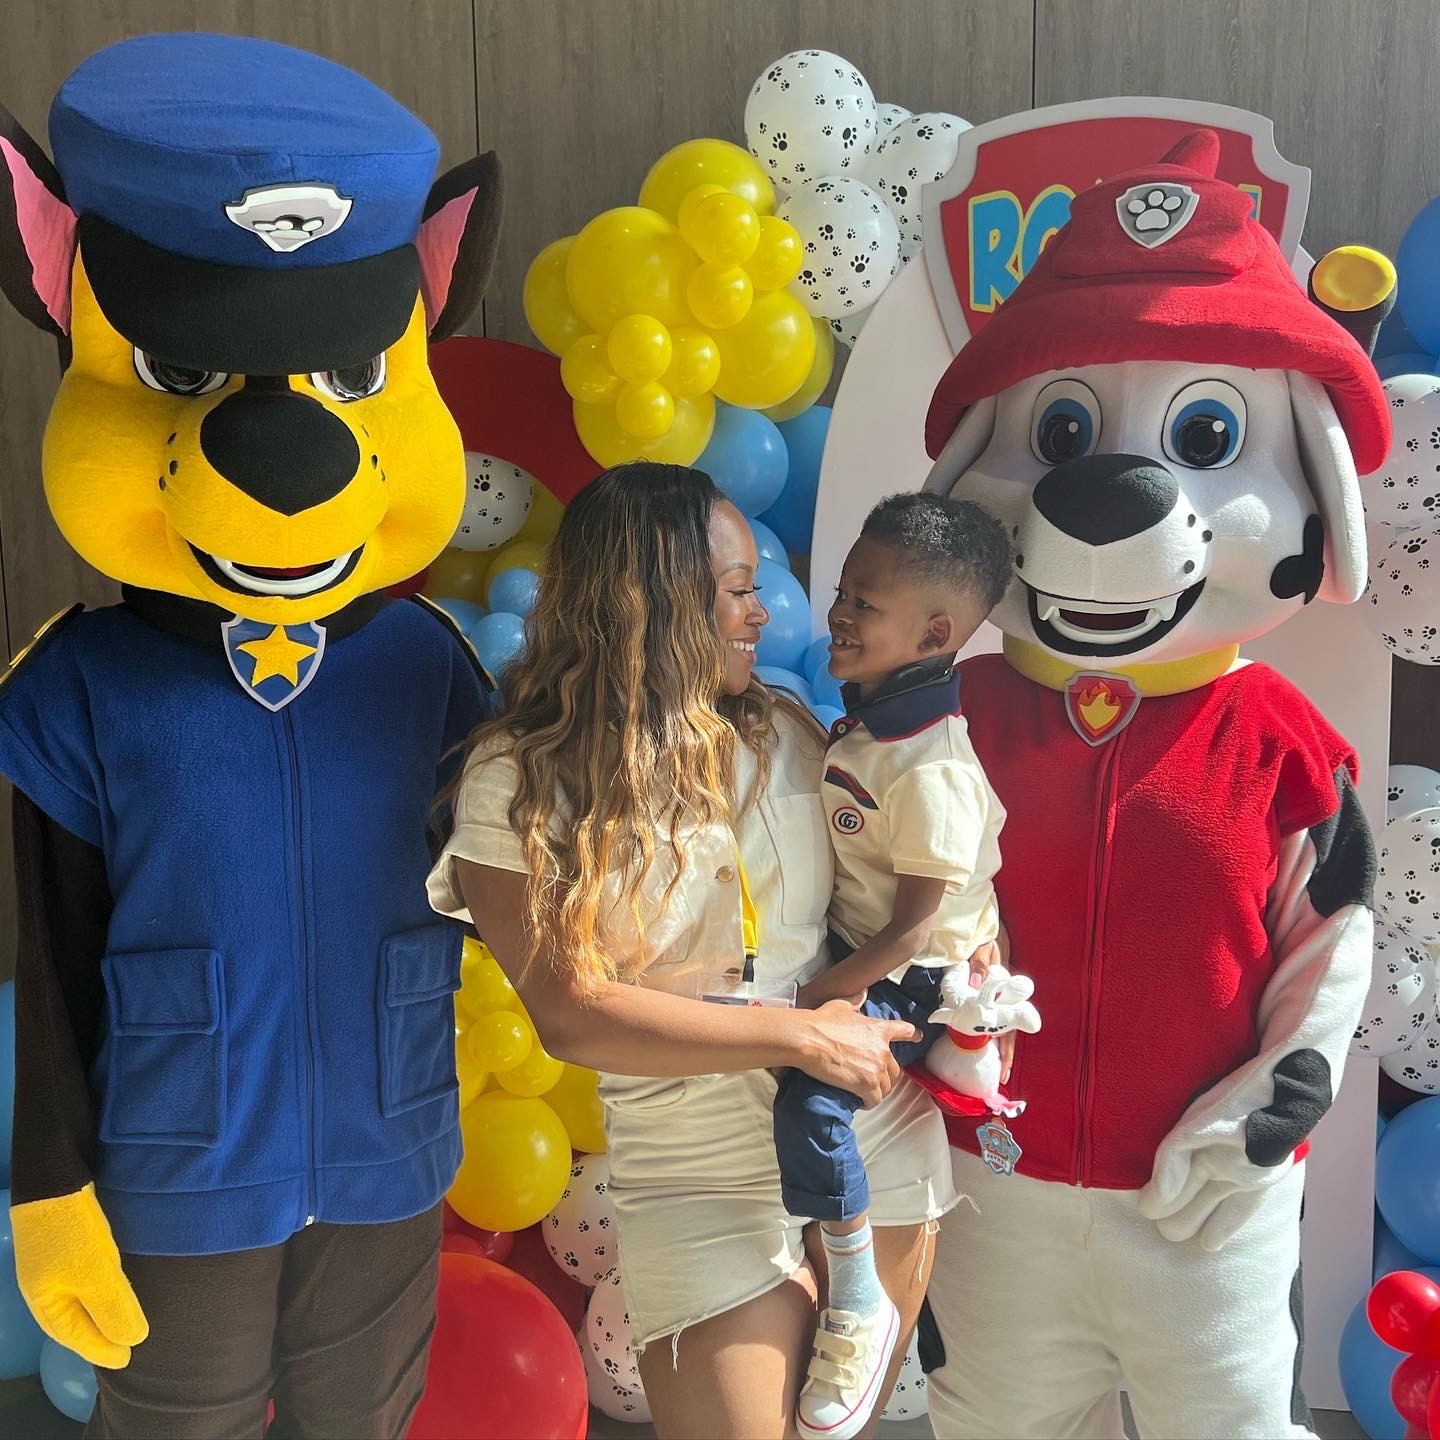 Tiffany and Roman looking at each other, smiling. They are stood with 2 characters from Paw Patrol.